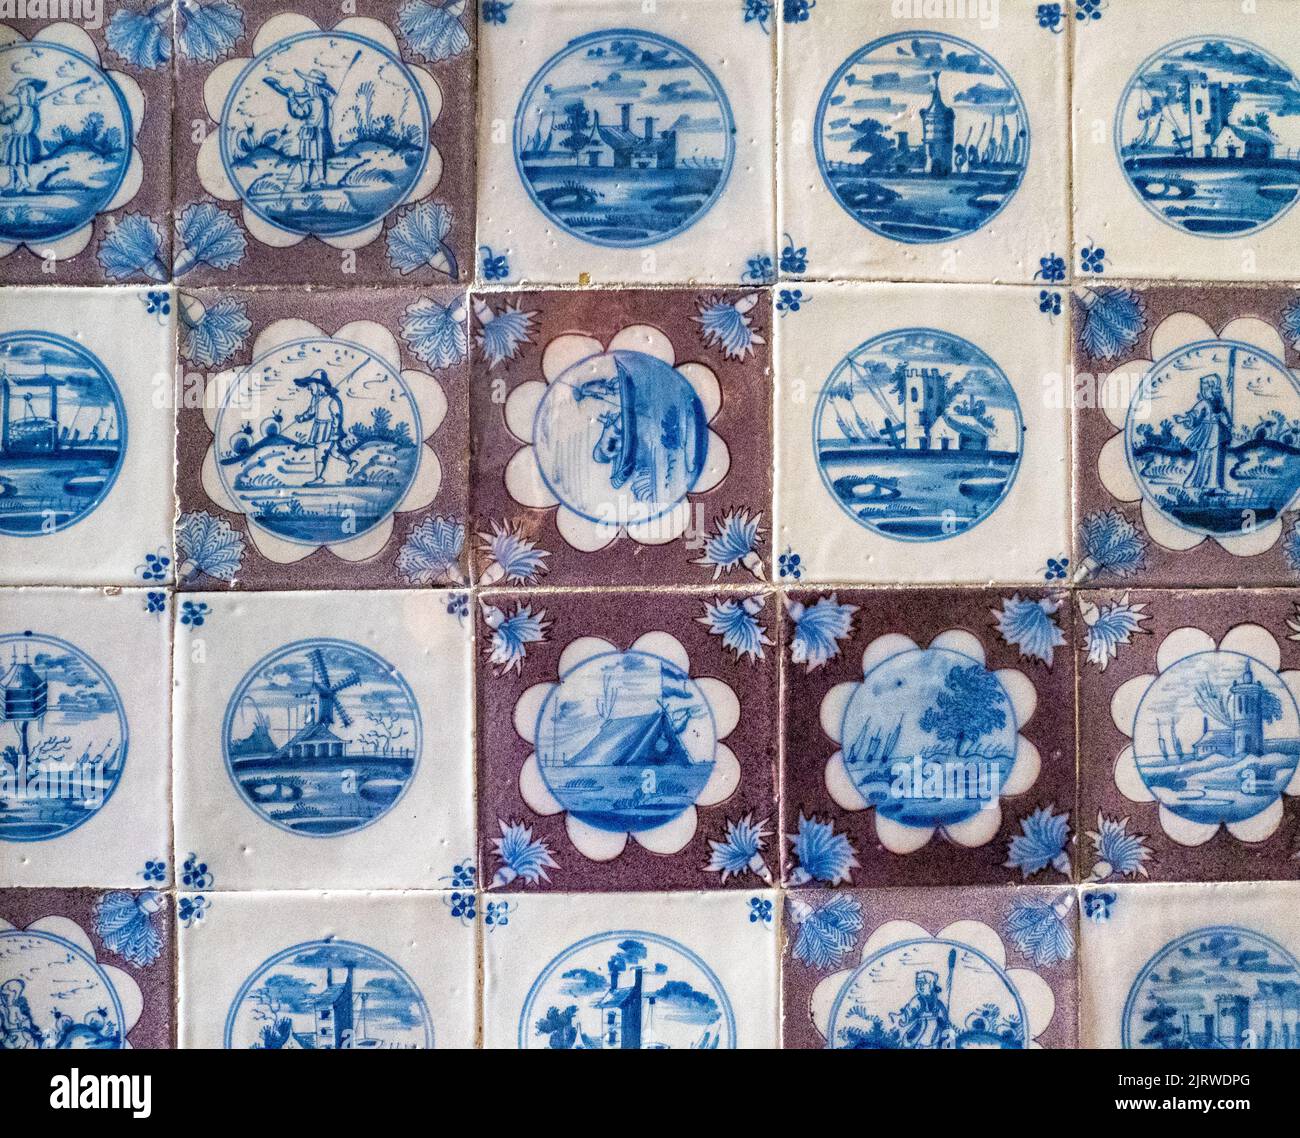 Individually hand painted wall tiles in the King's toilet at the Rosenborg Slot Copenhagen Denmark with a single tile placed wrongly Stock Photo